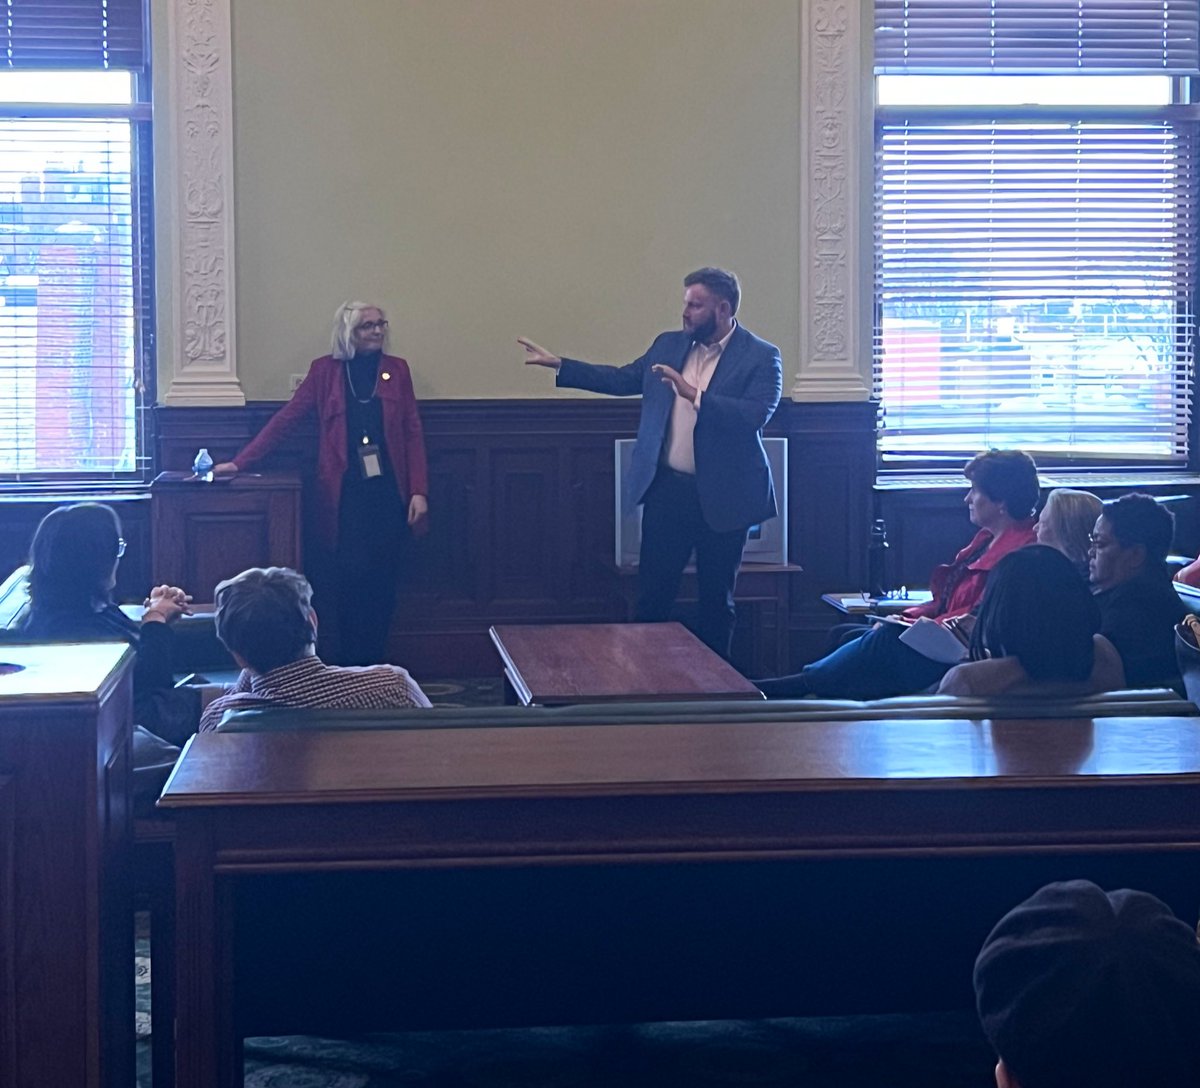 It was marvelous to see Cape Codders in the State House yesterday! TY @CapeCodLeaders for helping cultivate leadership in our community and promoting engagement with government. We had a great conversation with @SenSusanMoran on why everyone belongs in this building.